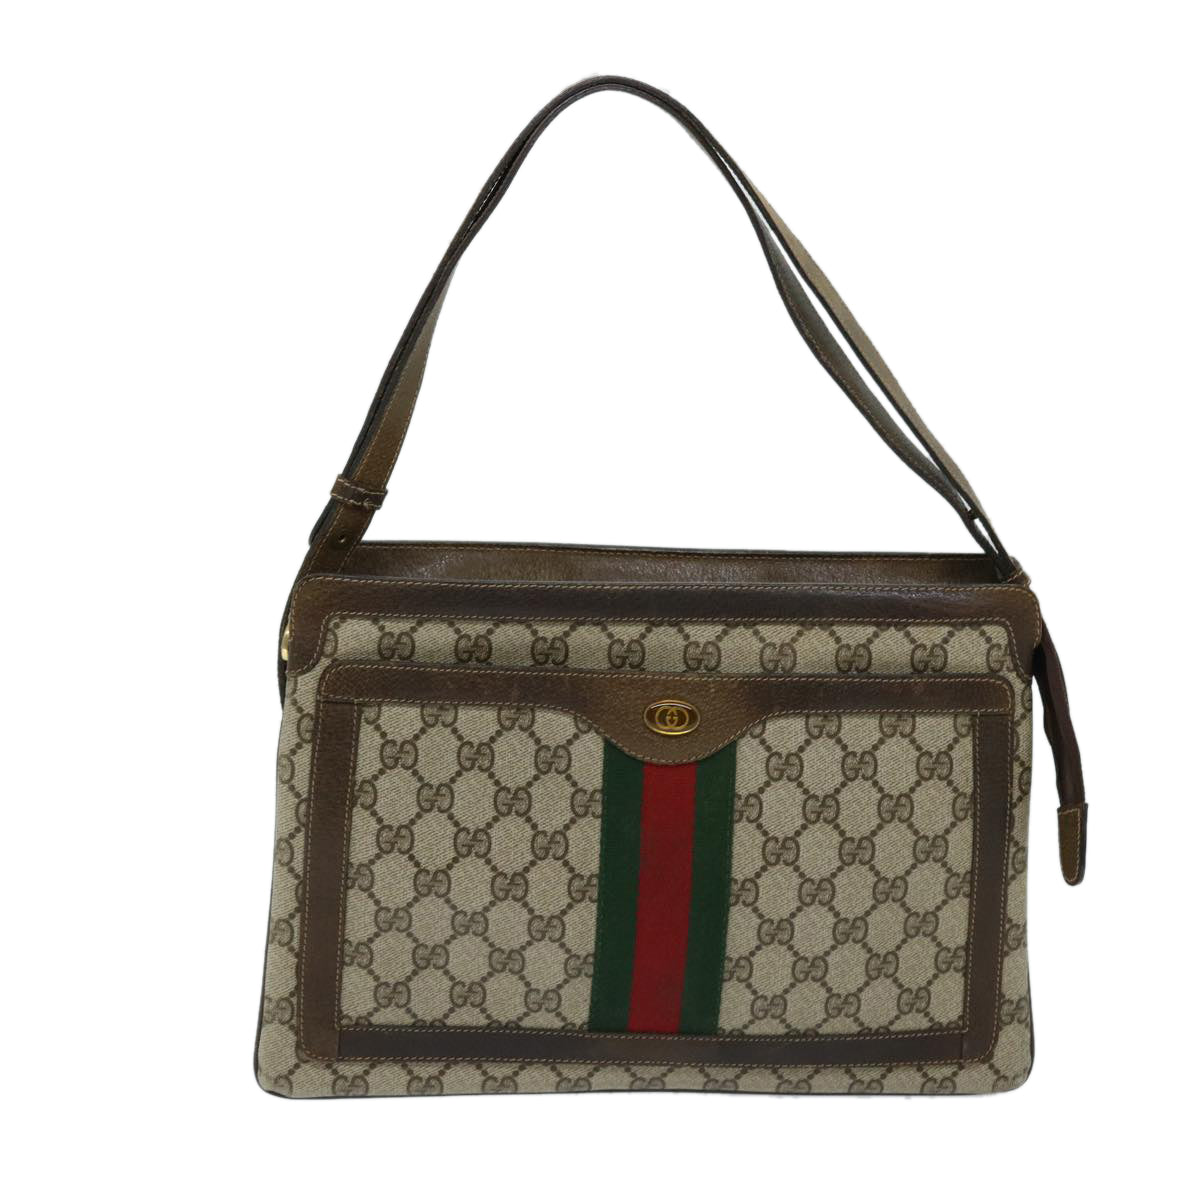 GUCCI GG Supreme Web Sherry Line Shoulder Bag Beige Red Green Auth ep3747 - 0